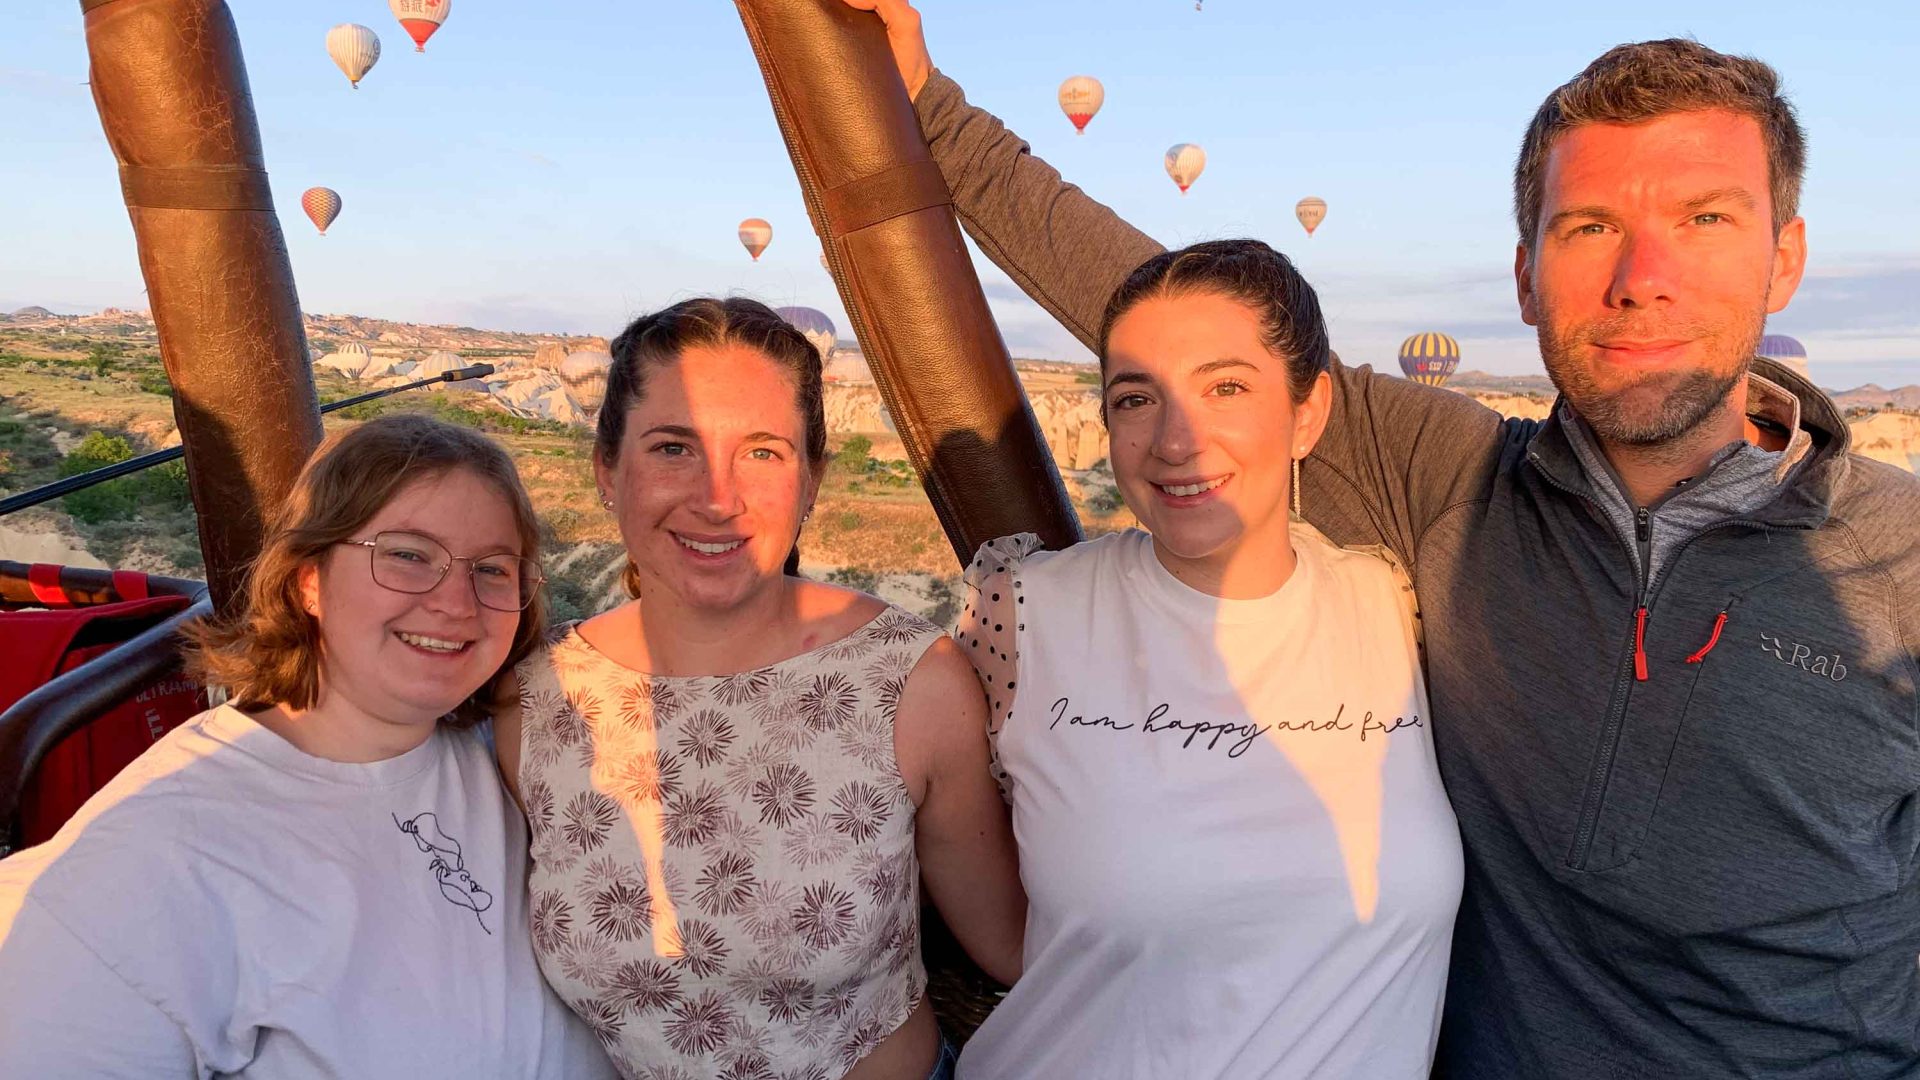 Morag with travel buddies on her Turkey trip with Intrepid. They are in the hot air balloon.